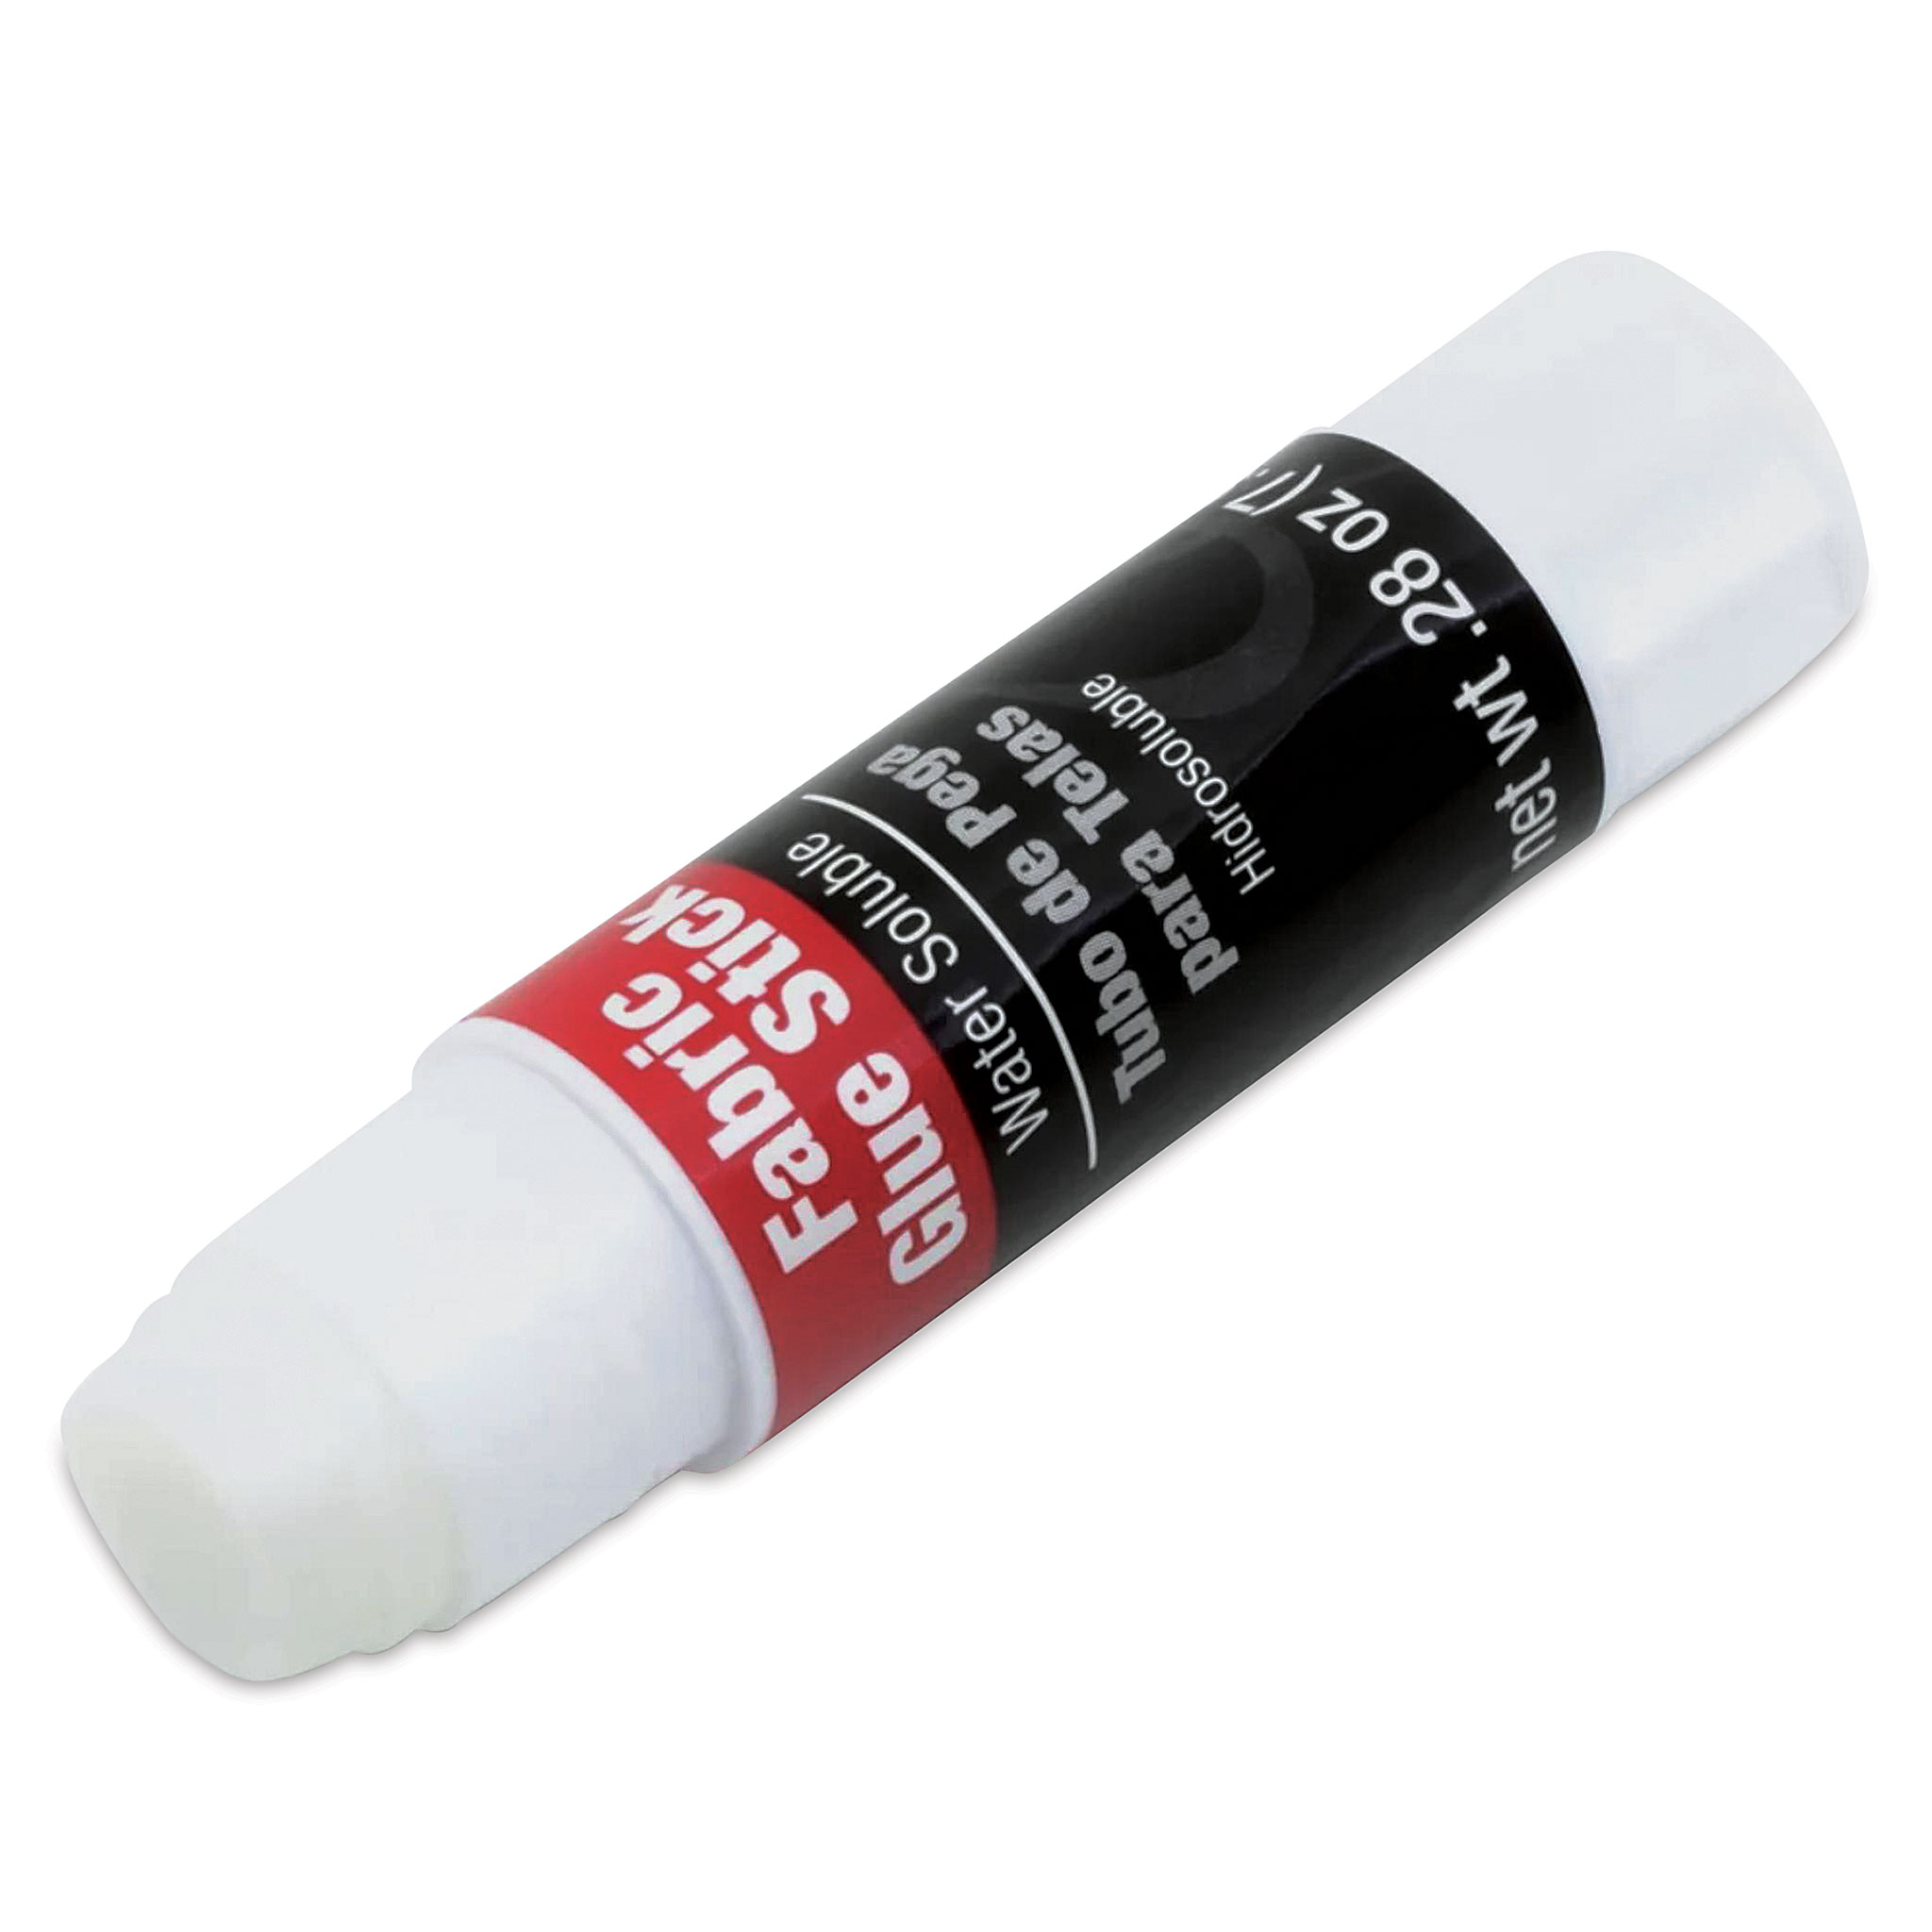 Fabric Glue Stick Temporary Adhesive by Dritz 